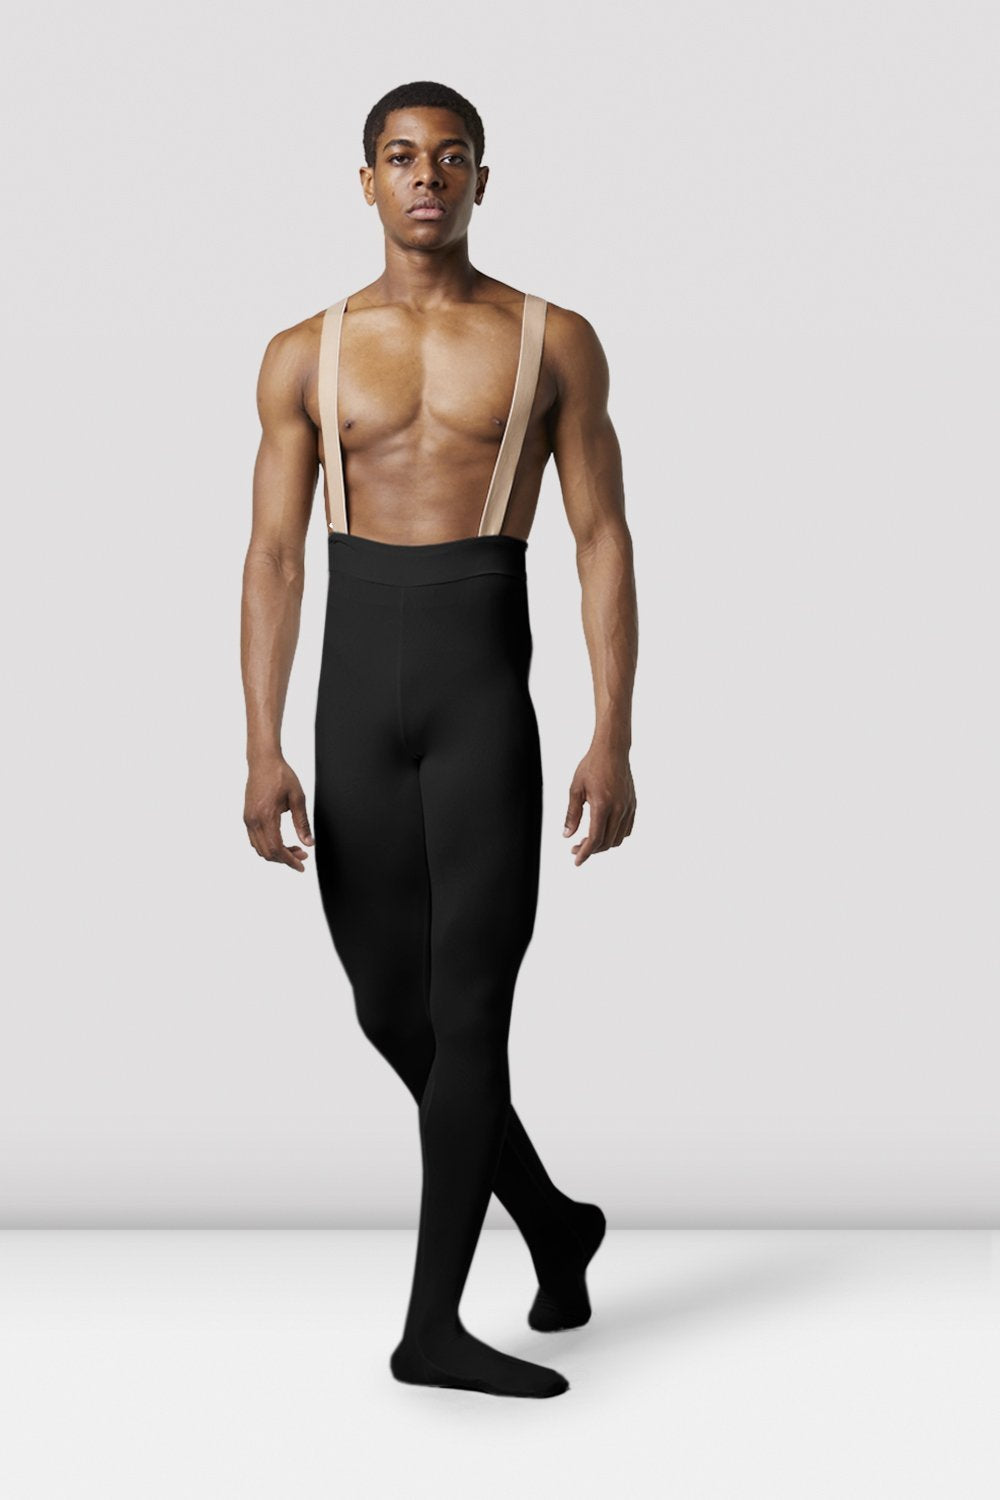 adams kenneth recommends ballet guys in tights pic